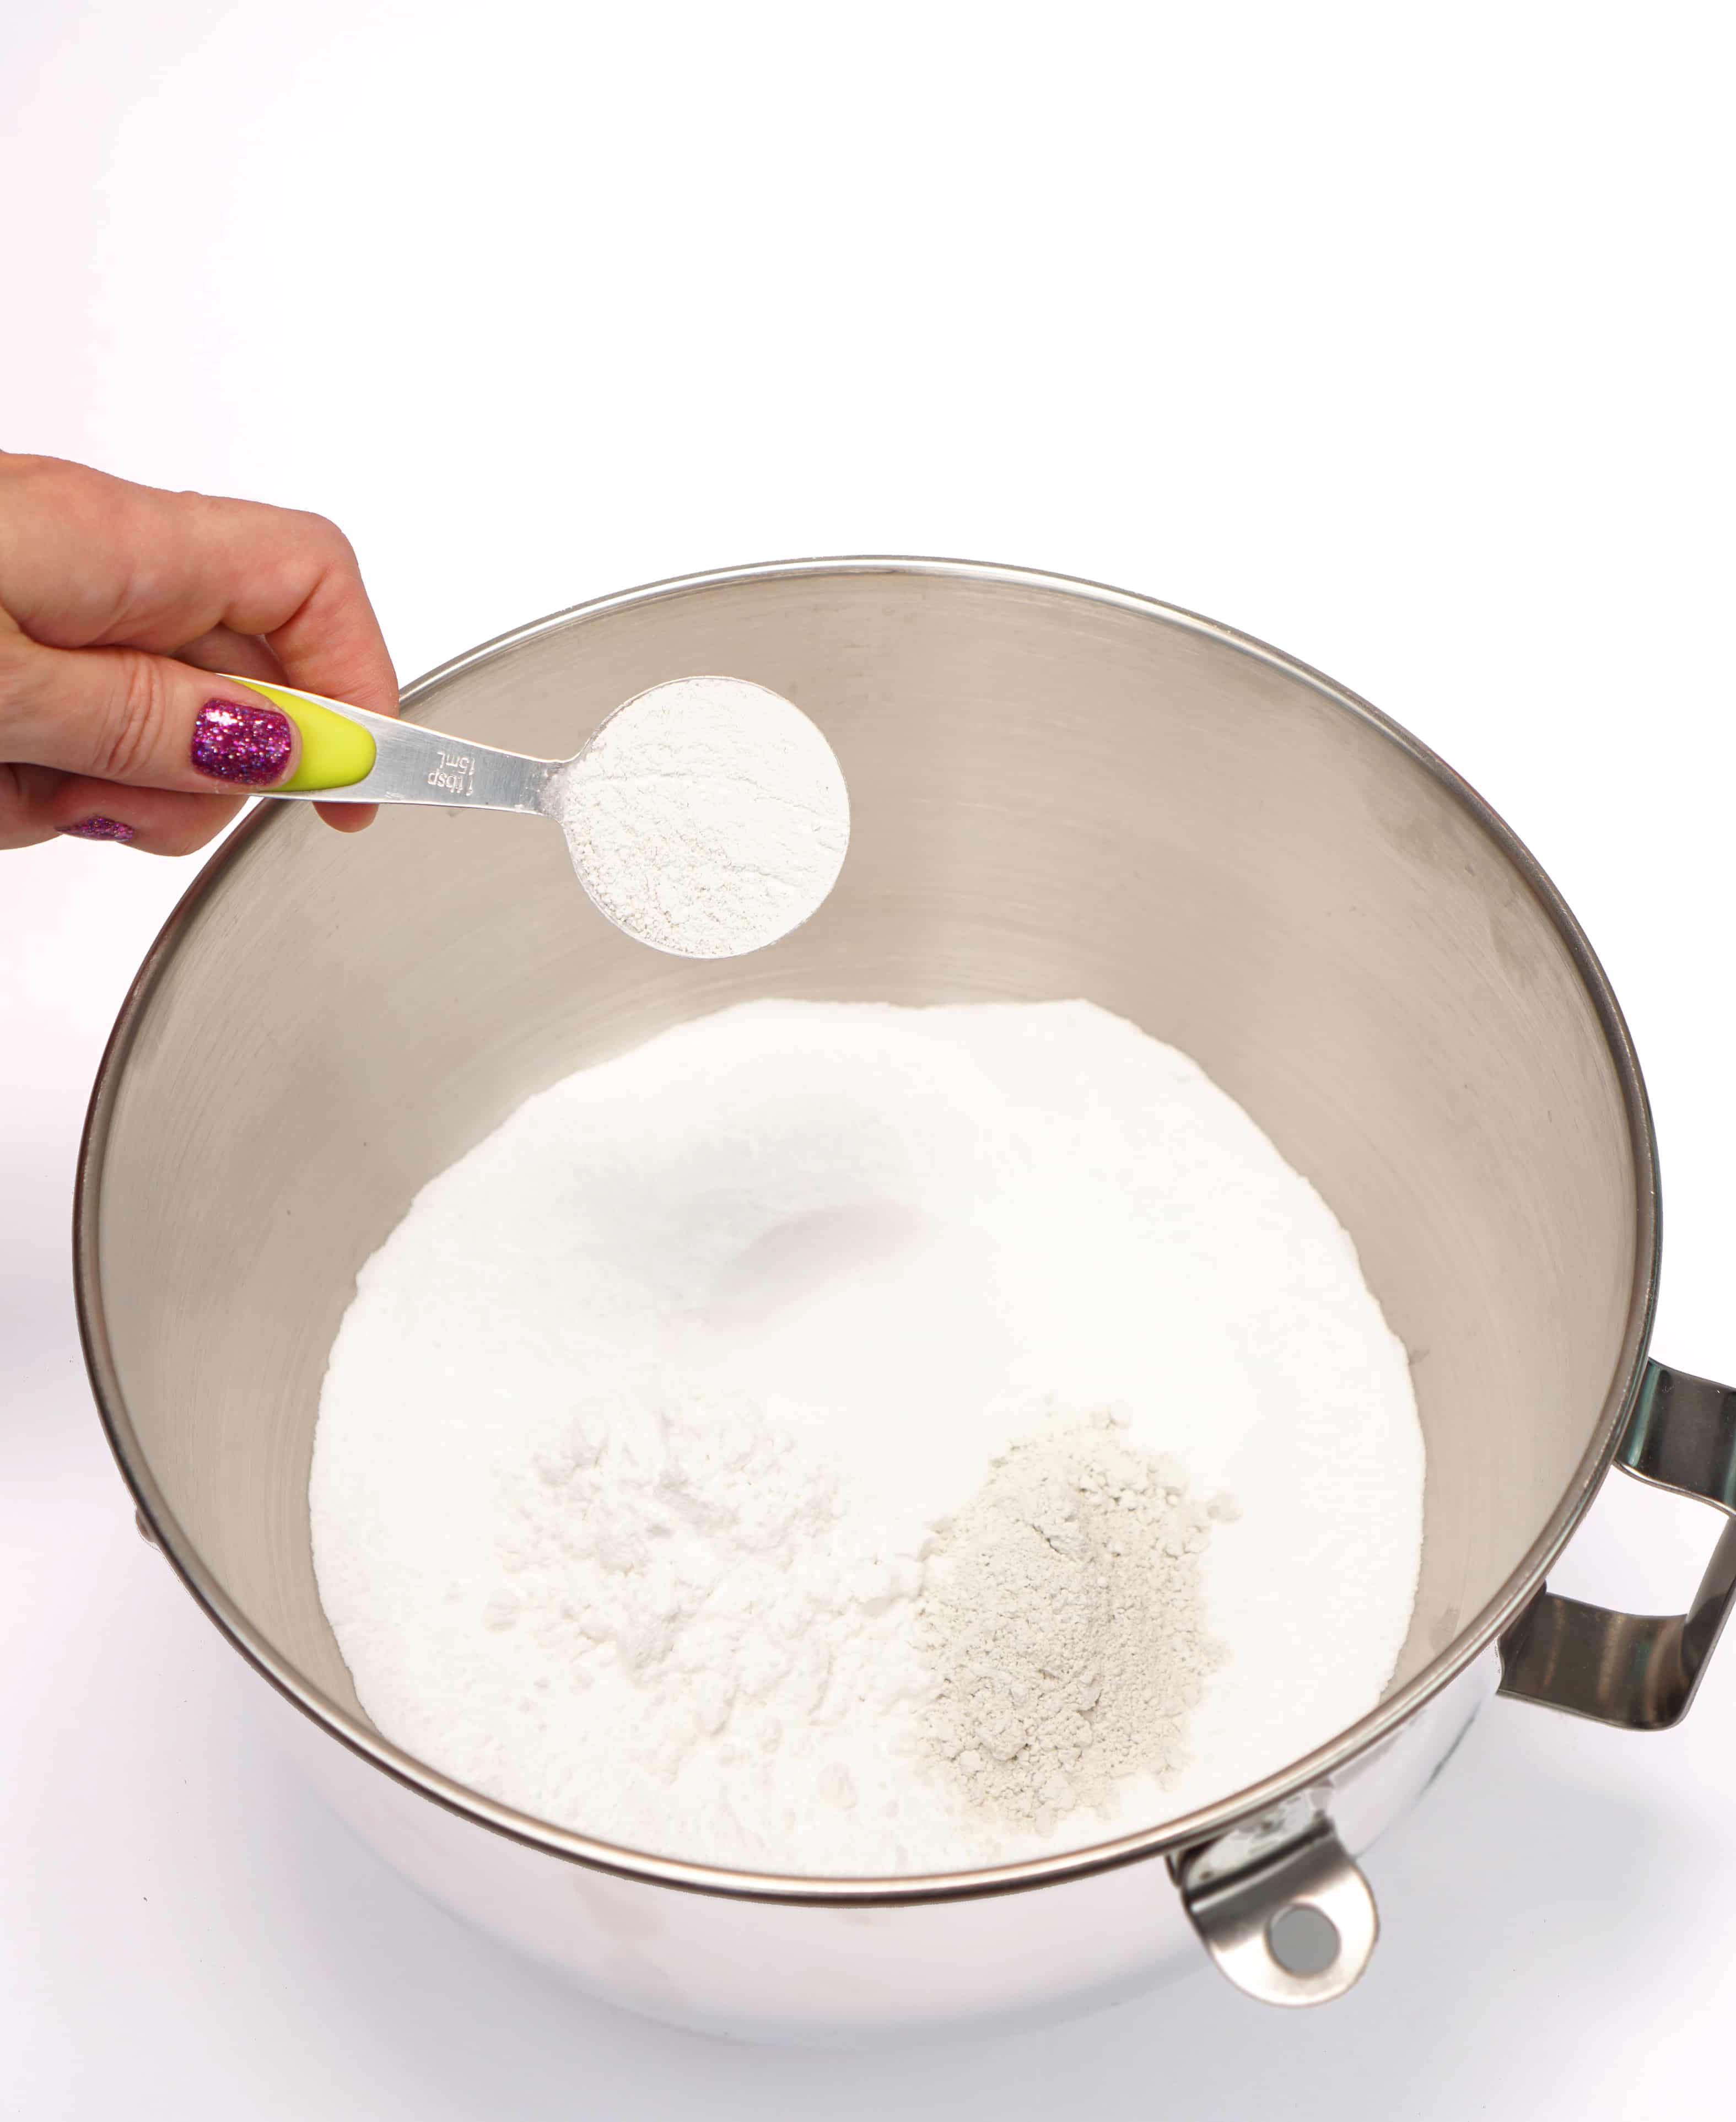 Adding dry ingredients to a mixing bowl to make bath bombs